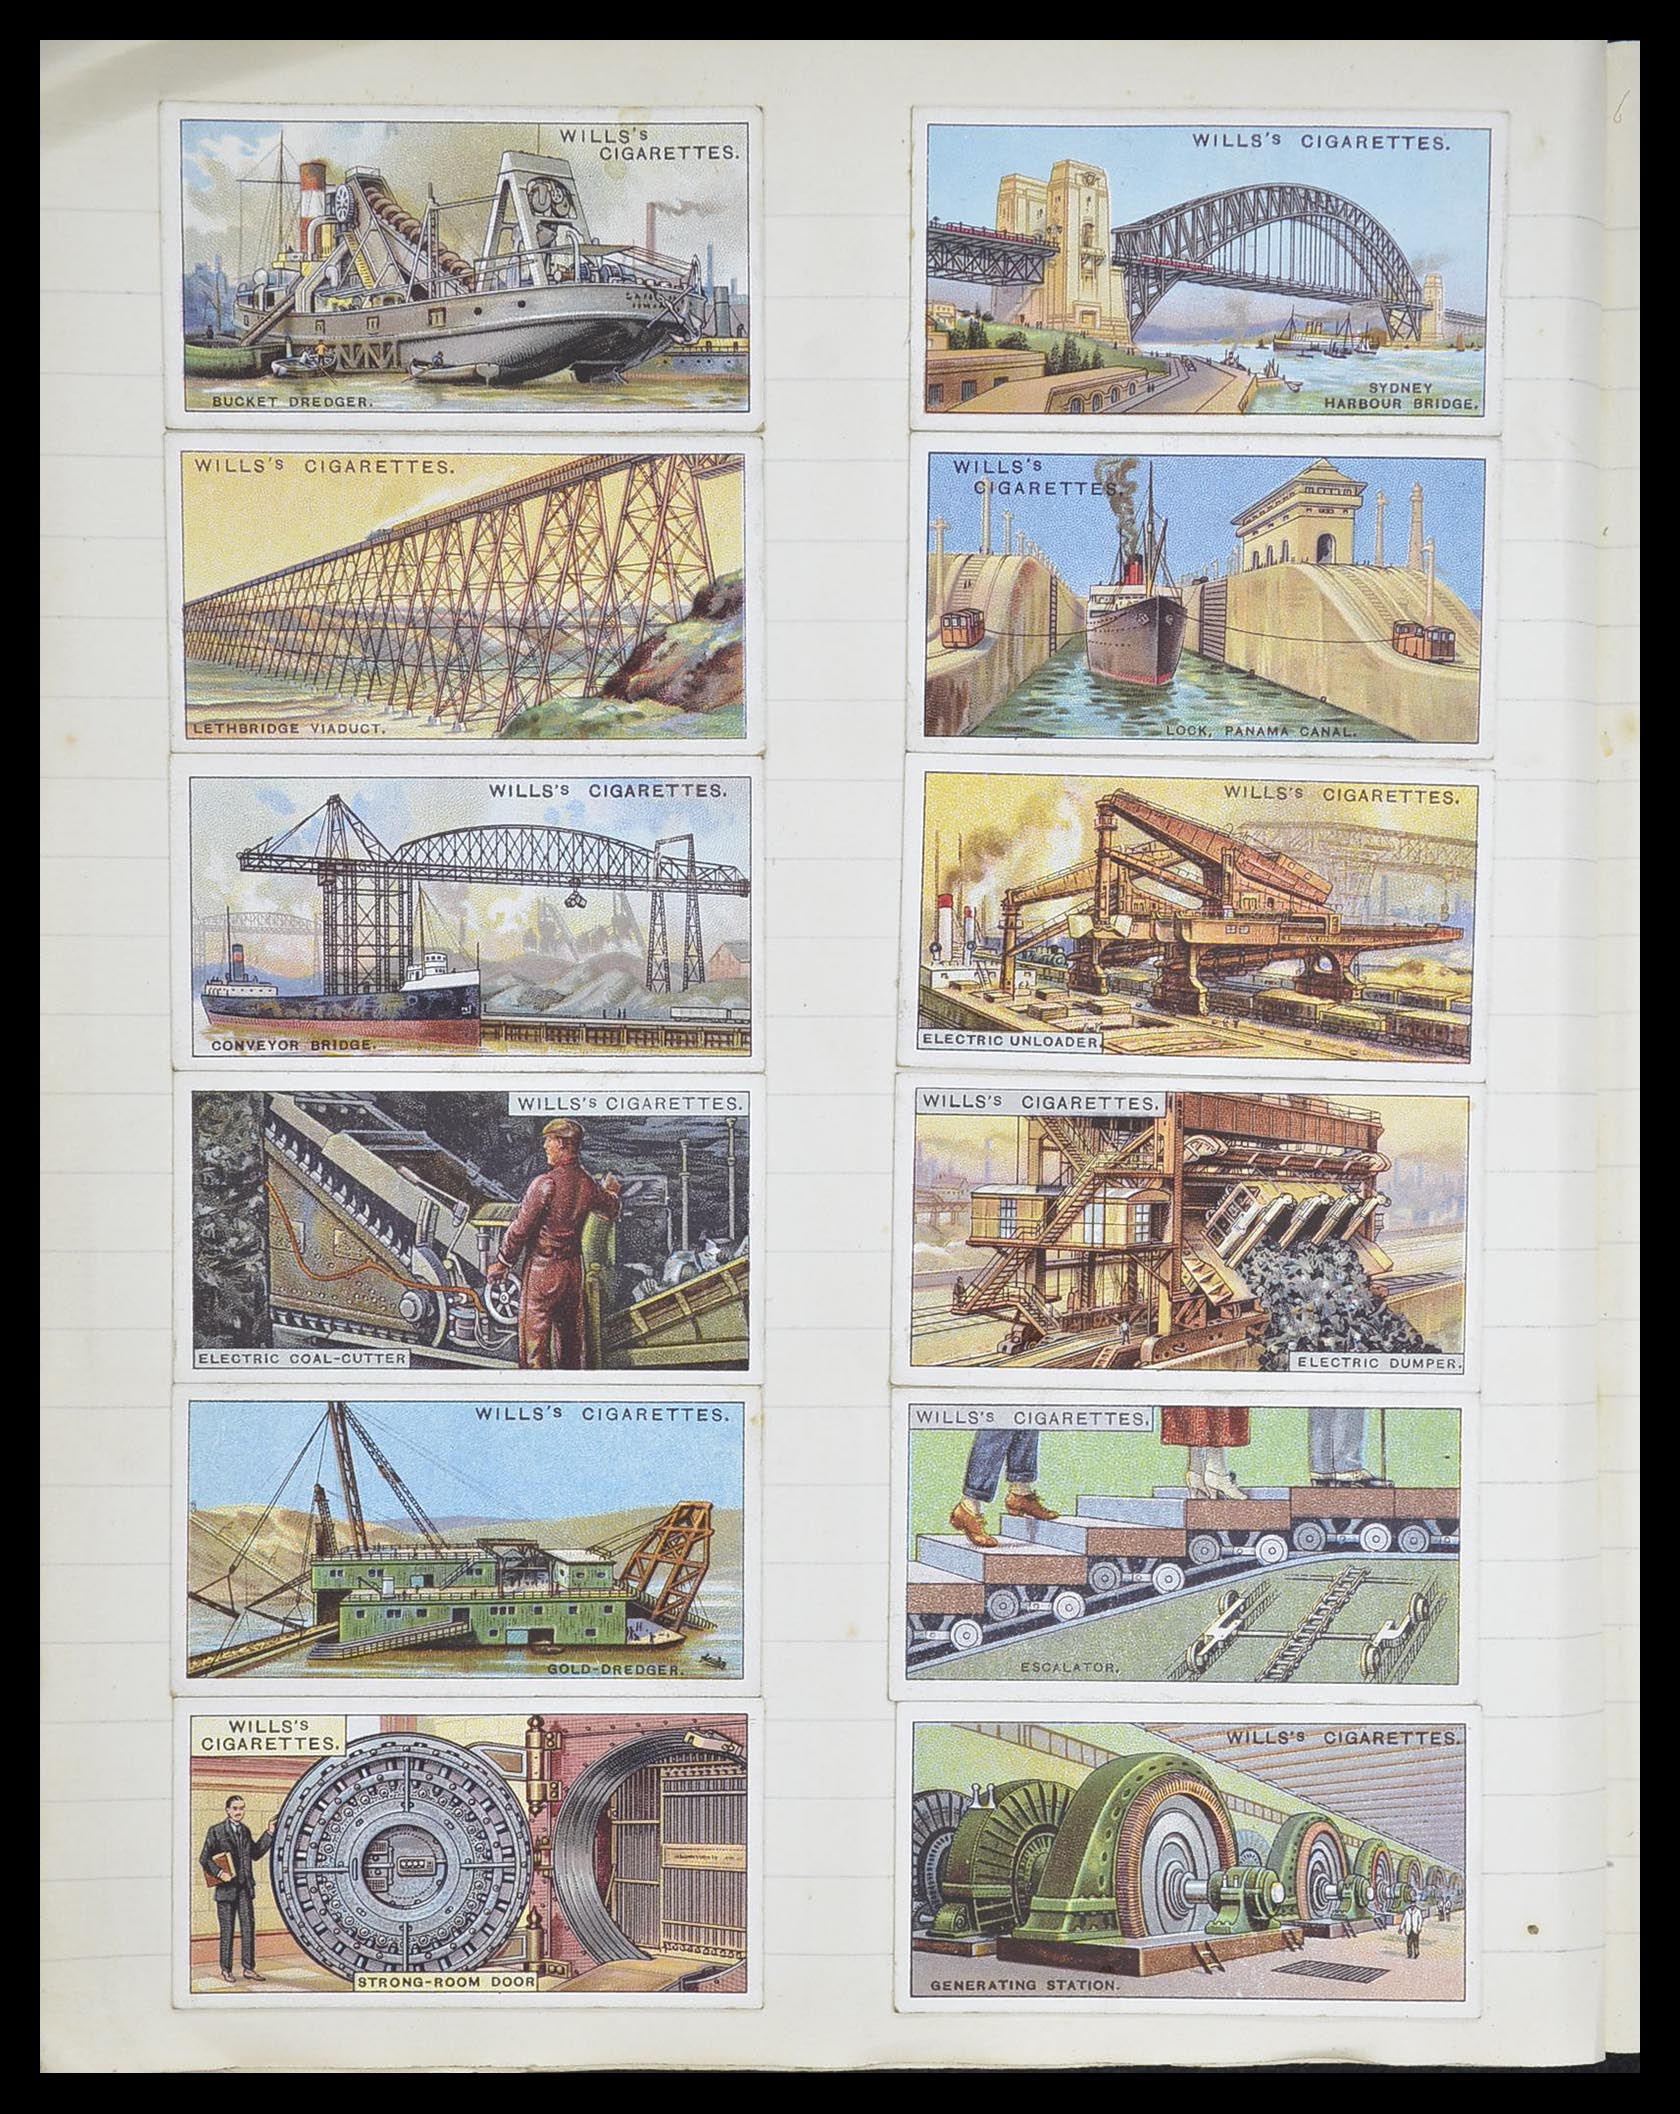 33444 098 - Stamp collection 33444 Great Britain cigarette cards.